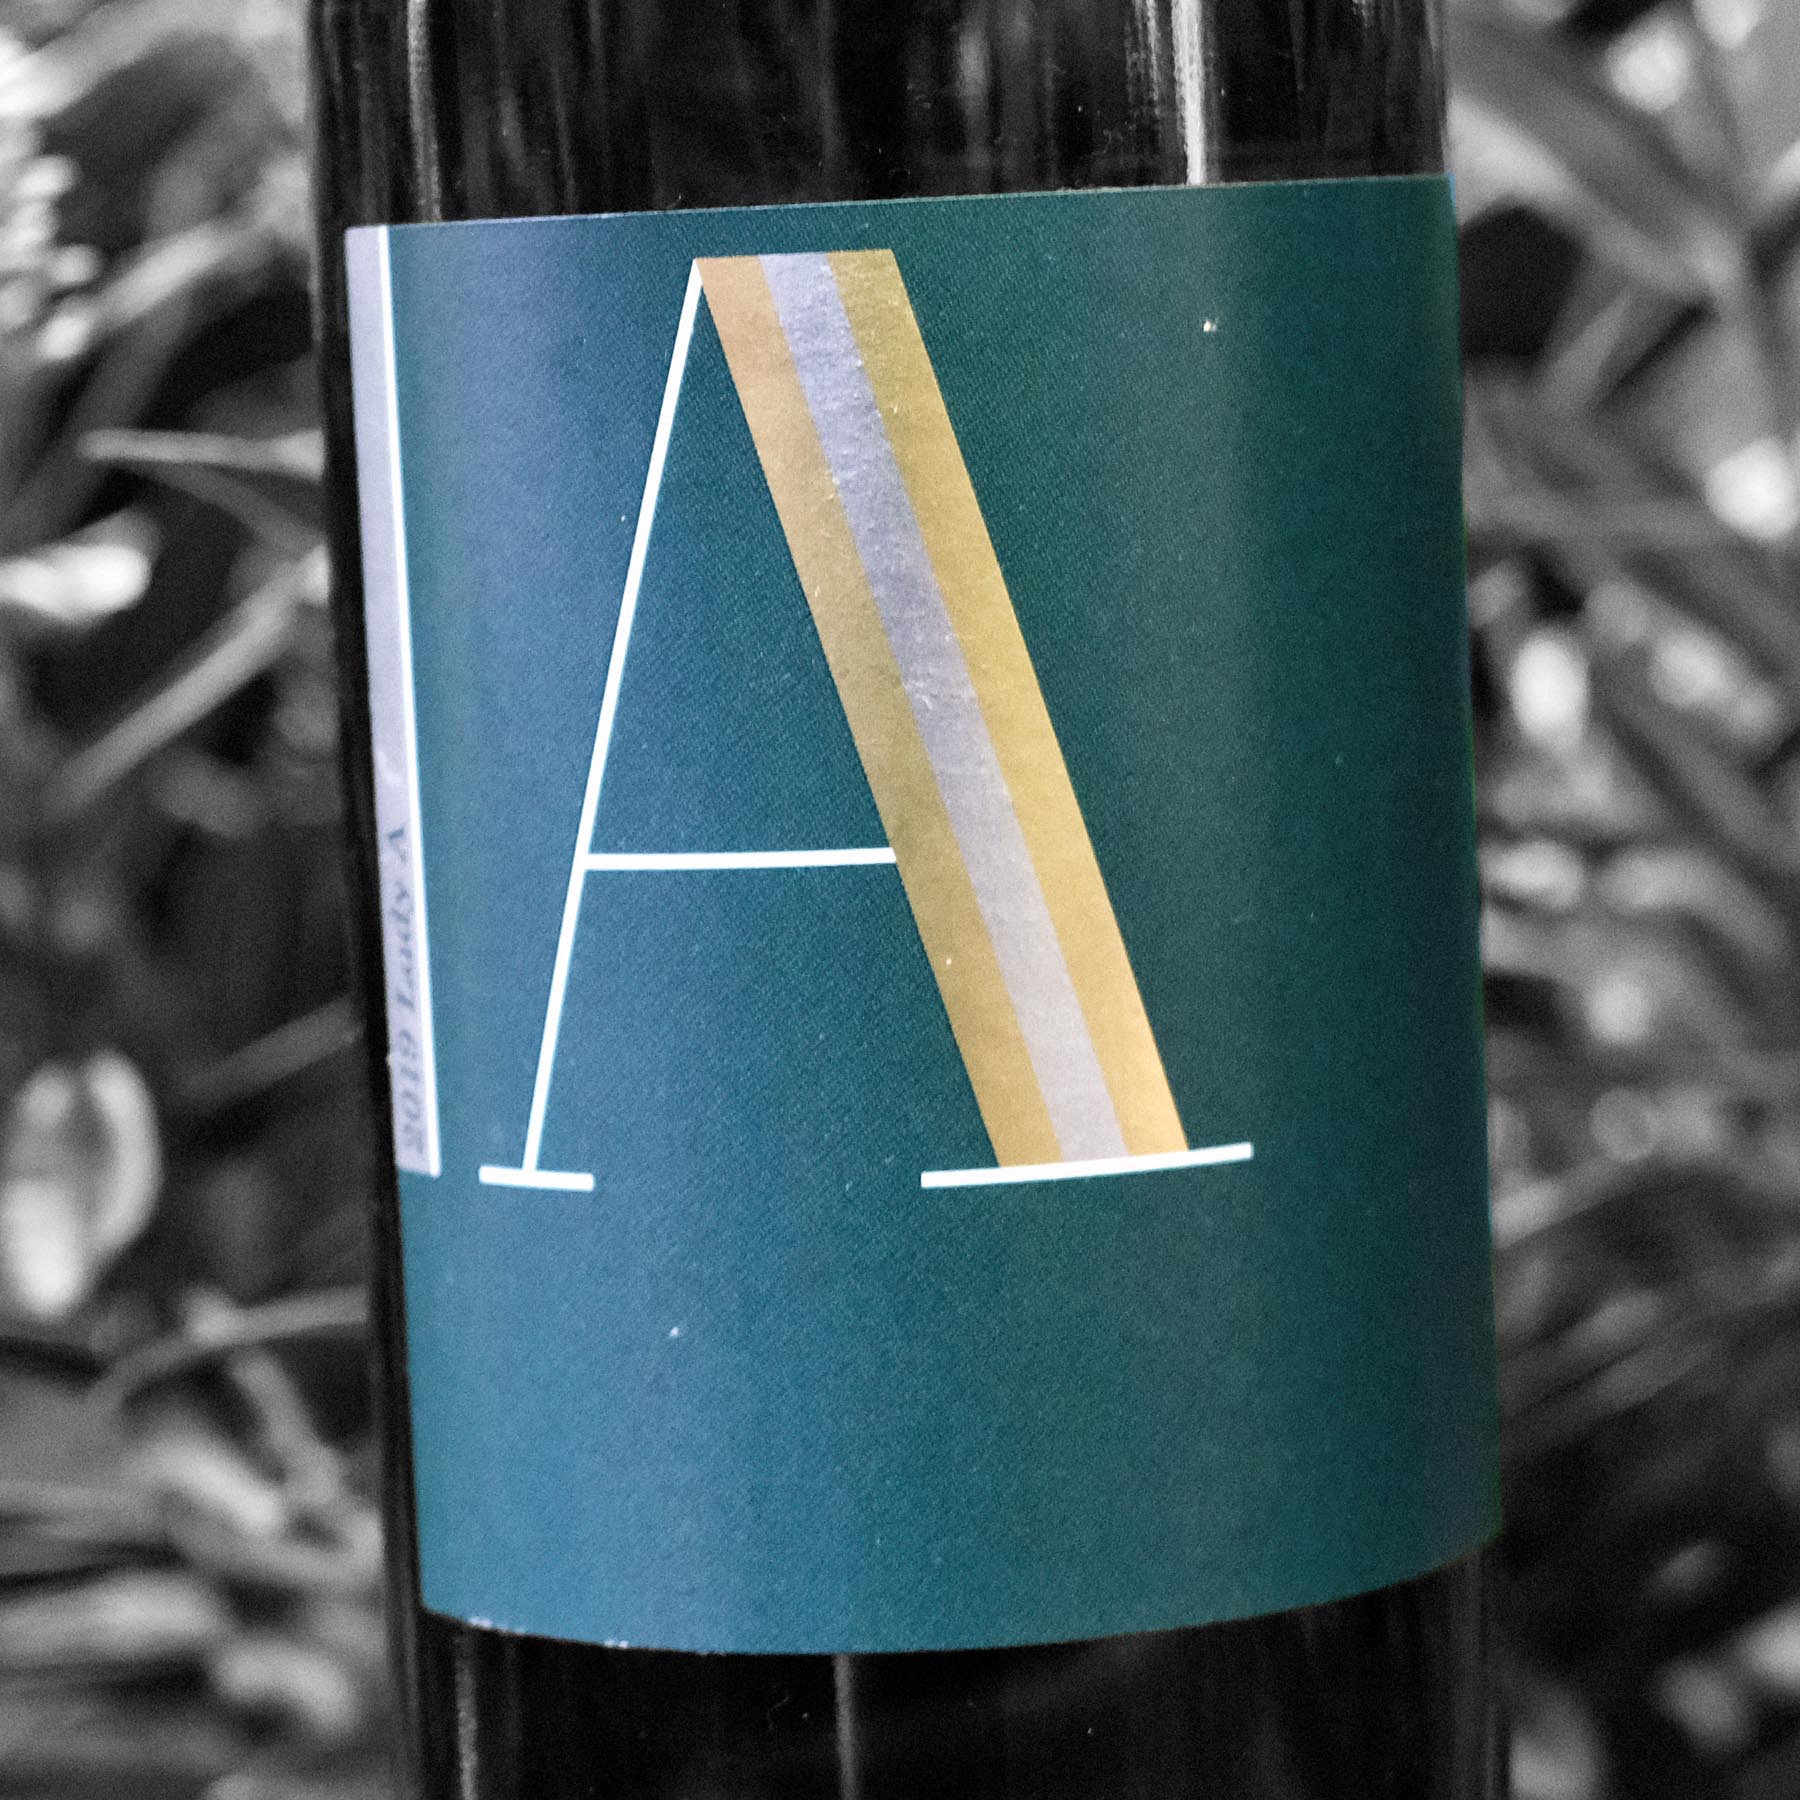 Domaine A Lady A 2019 Coal Valley, Tasania